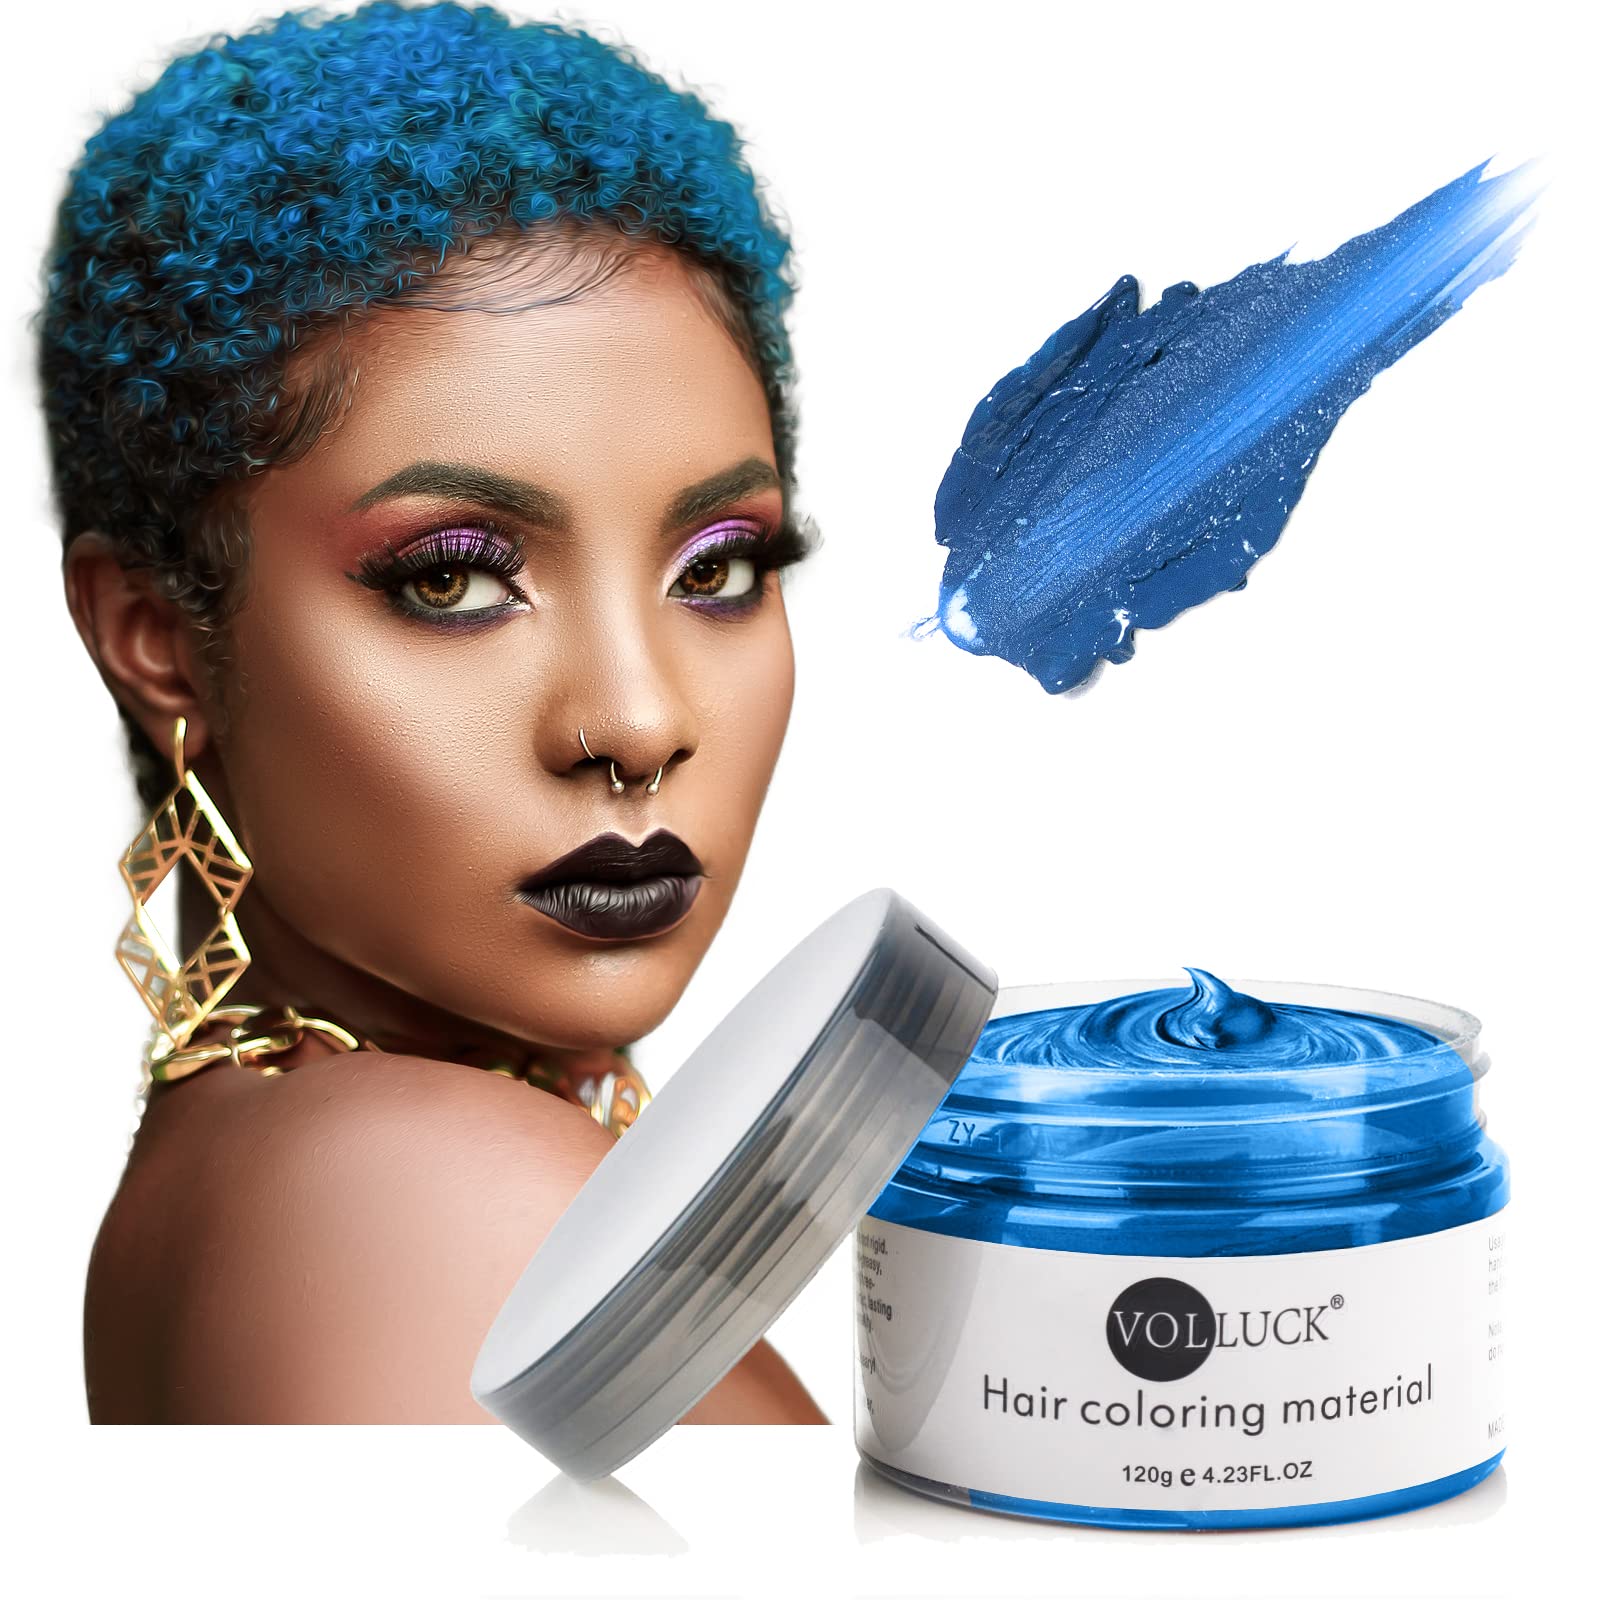 Blue Hair Coloring Wax Temporary Hair Clay Pomades 4.23 oz,Natural Hair Dye  Material Disposable Hair Styling Clay Ash for Cosplay,Halloween,Party #07  Blue